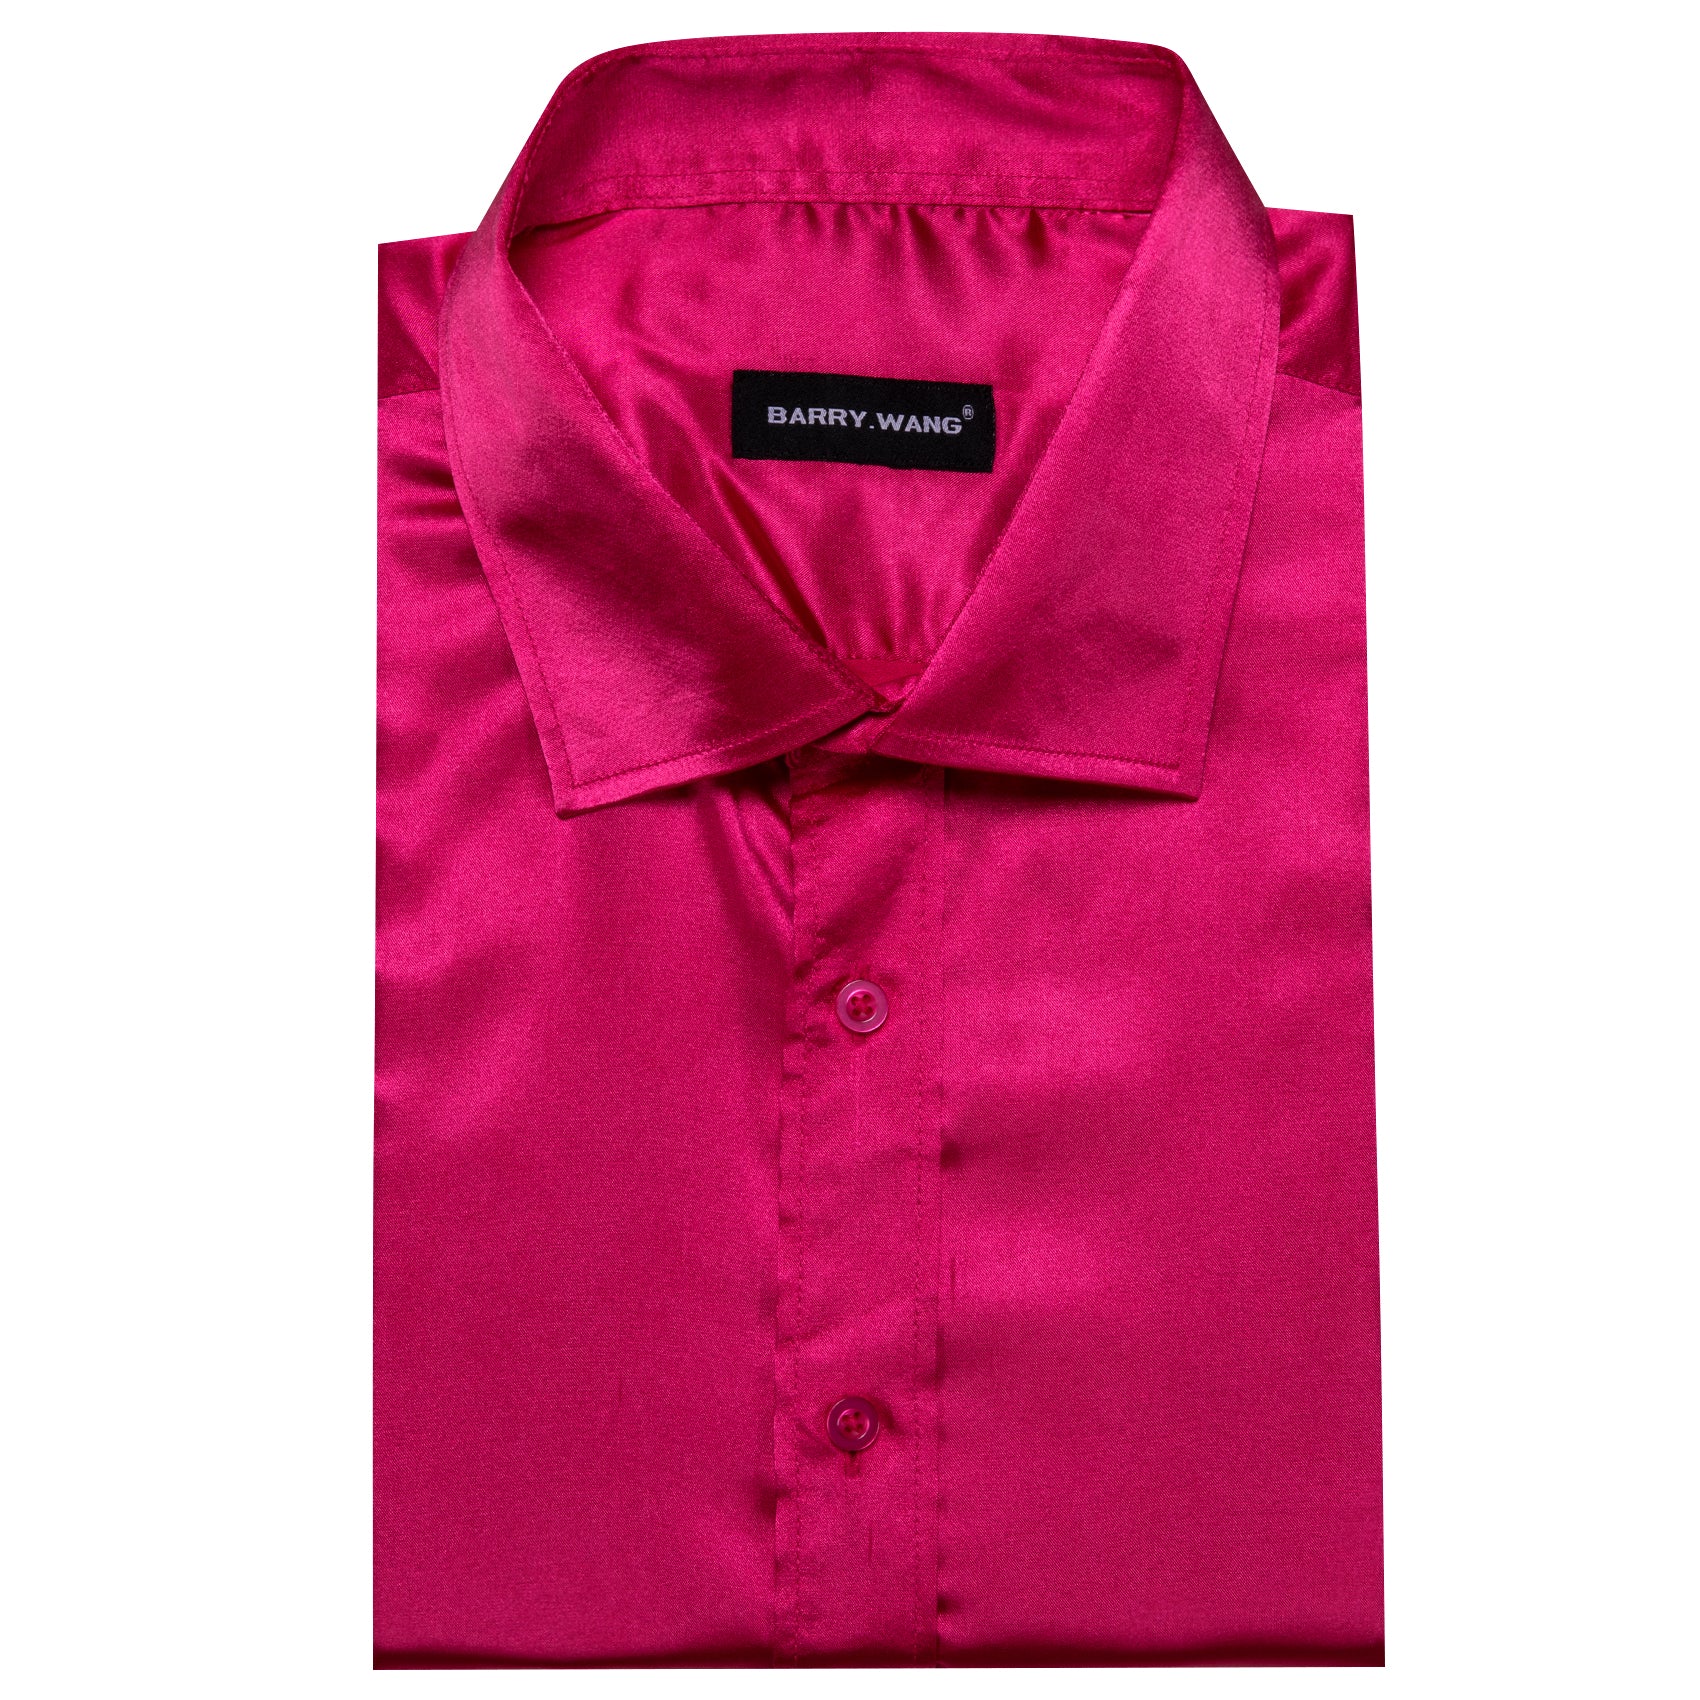 Barry.wang Red Violet Solid Silk Men's Shirt